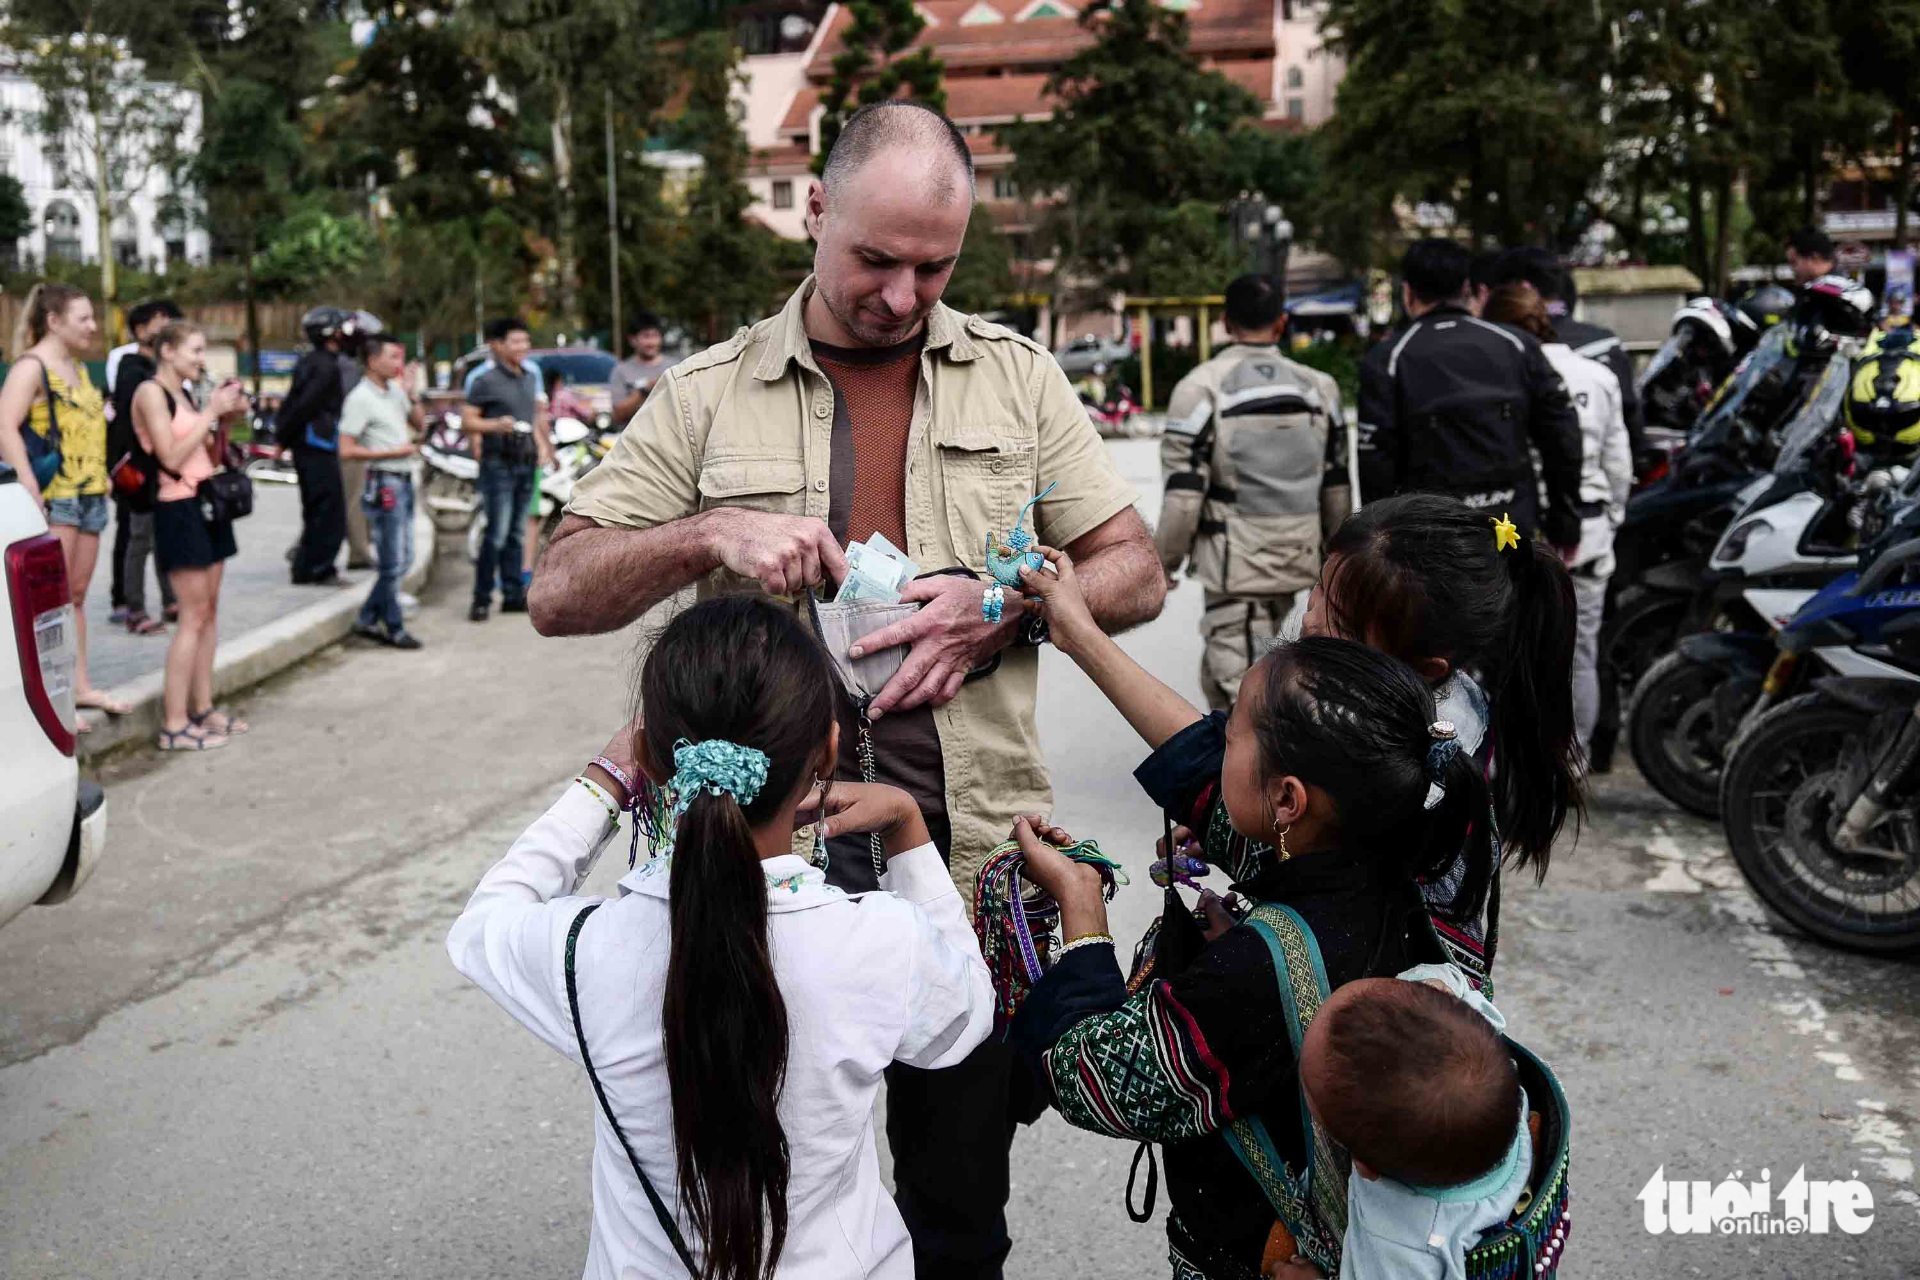 A foreign tourist takes out money from his wallet to buy souvenirs from local children.